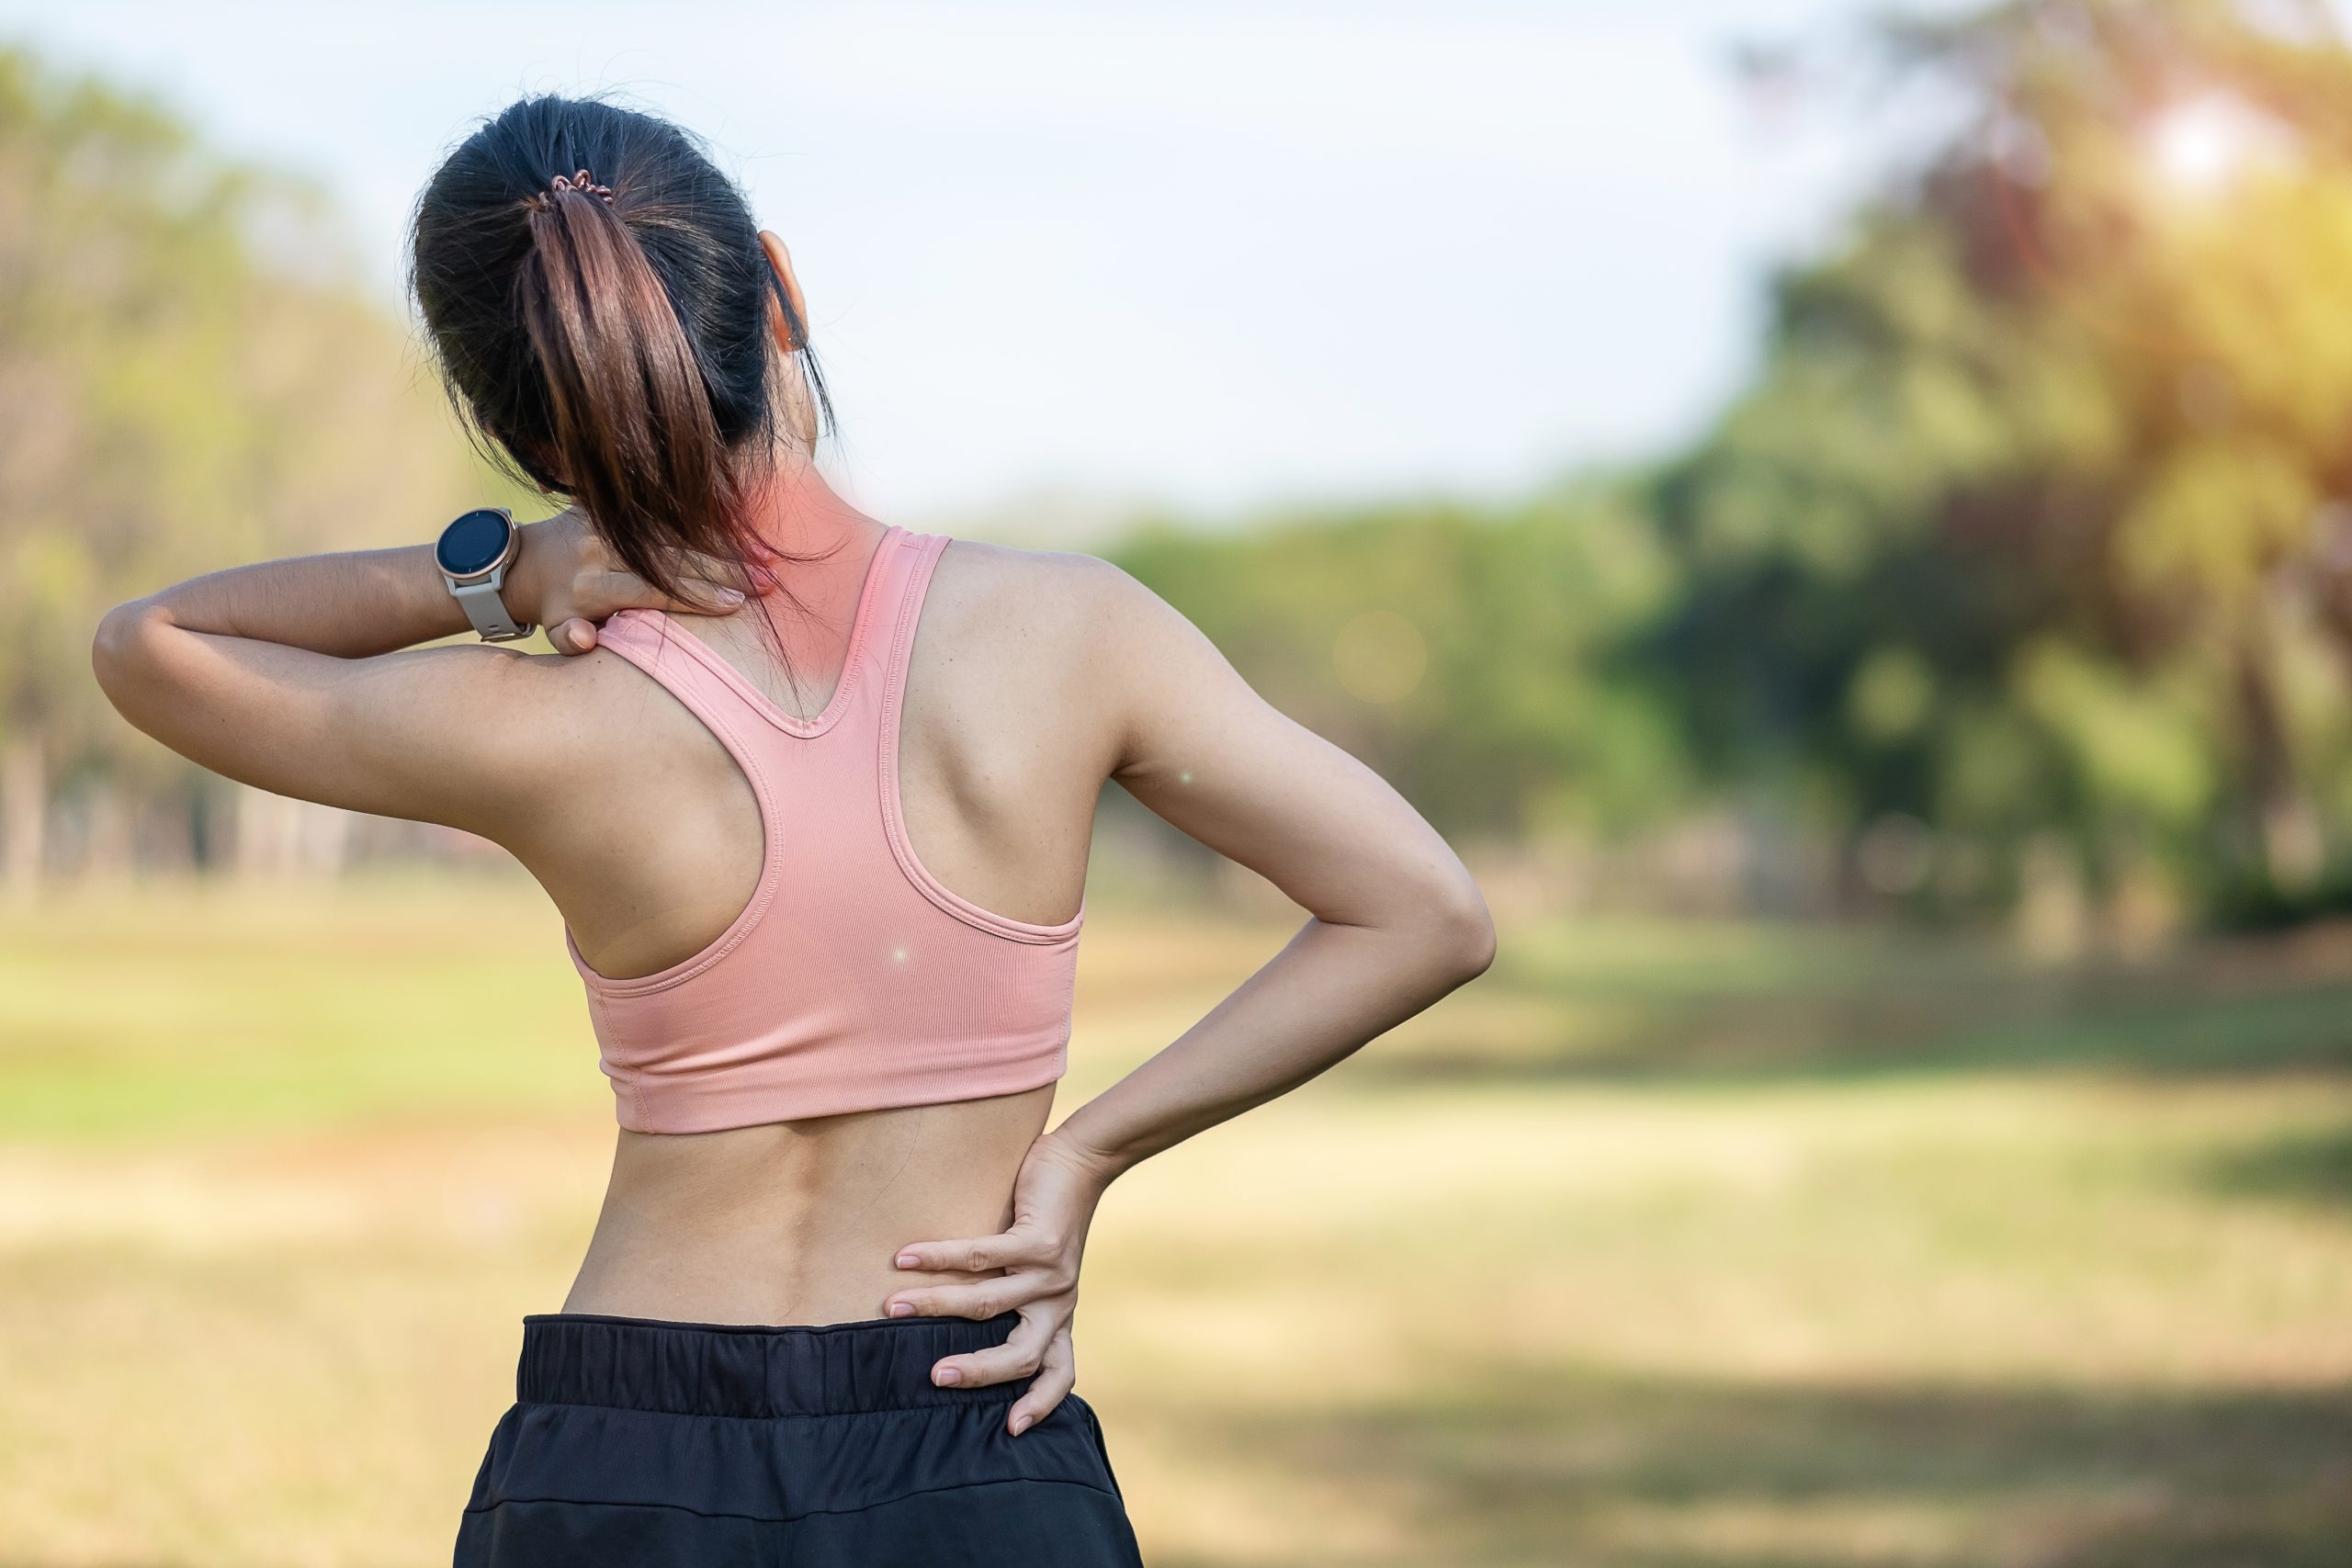 A young woman in workout clothes, holding her neck and back in pain.